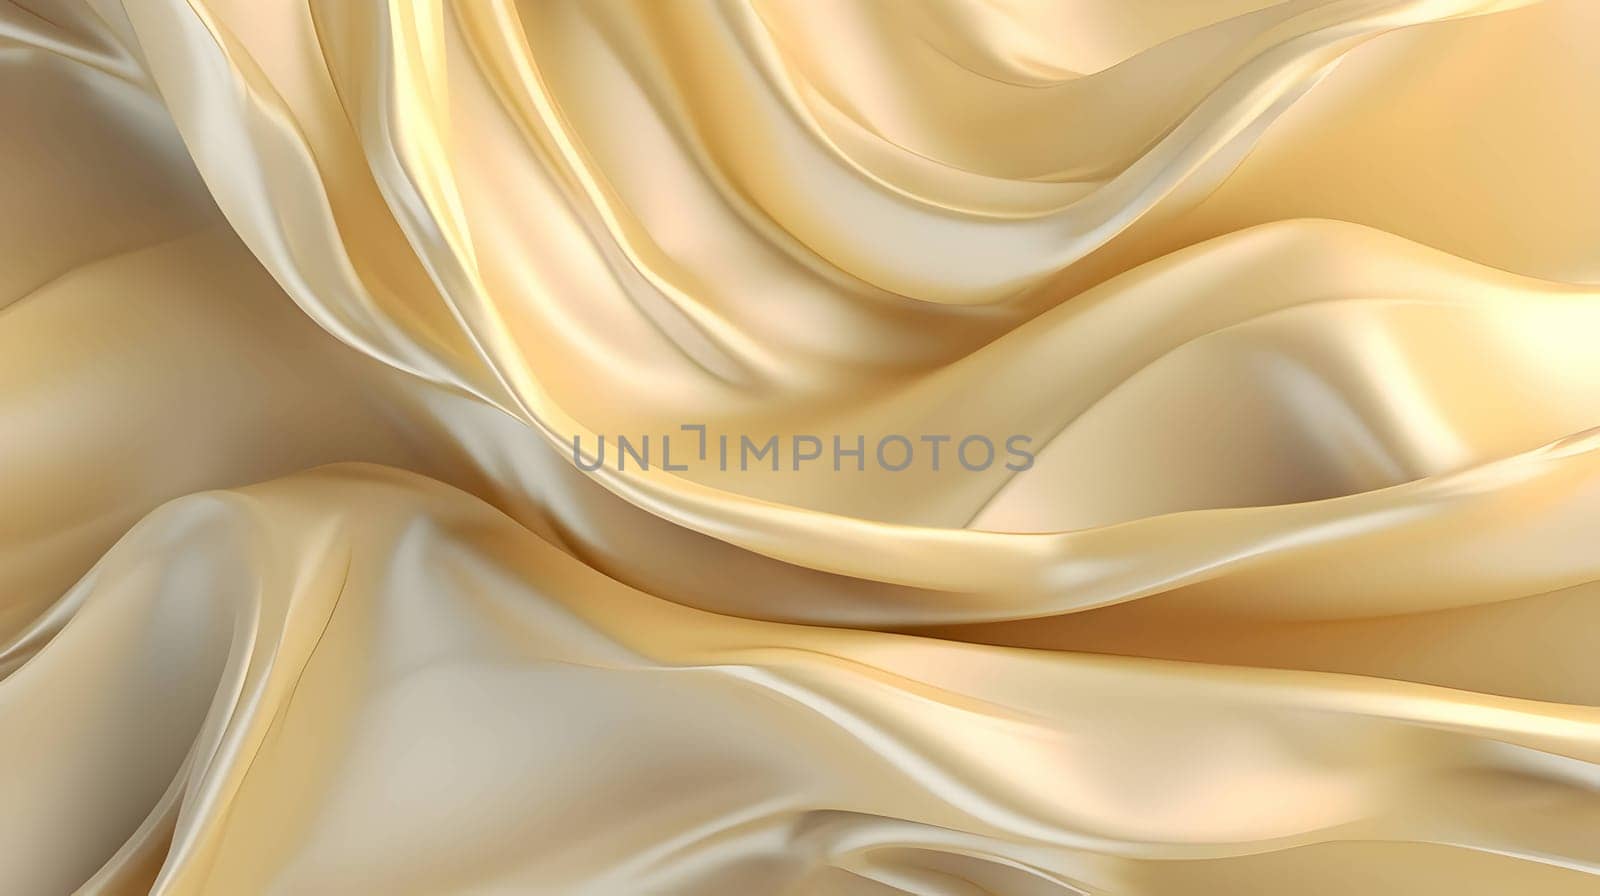 The abstract background wallpaper showcases the texture of sky gold silk fabric, with elegant folds creating a visually pleasing and tactile impression.